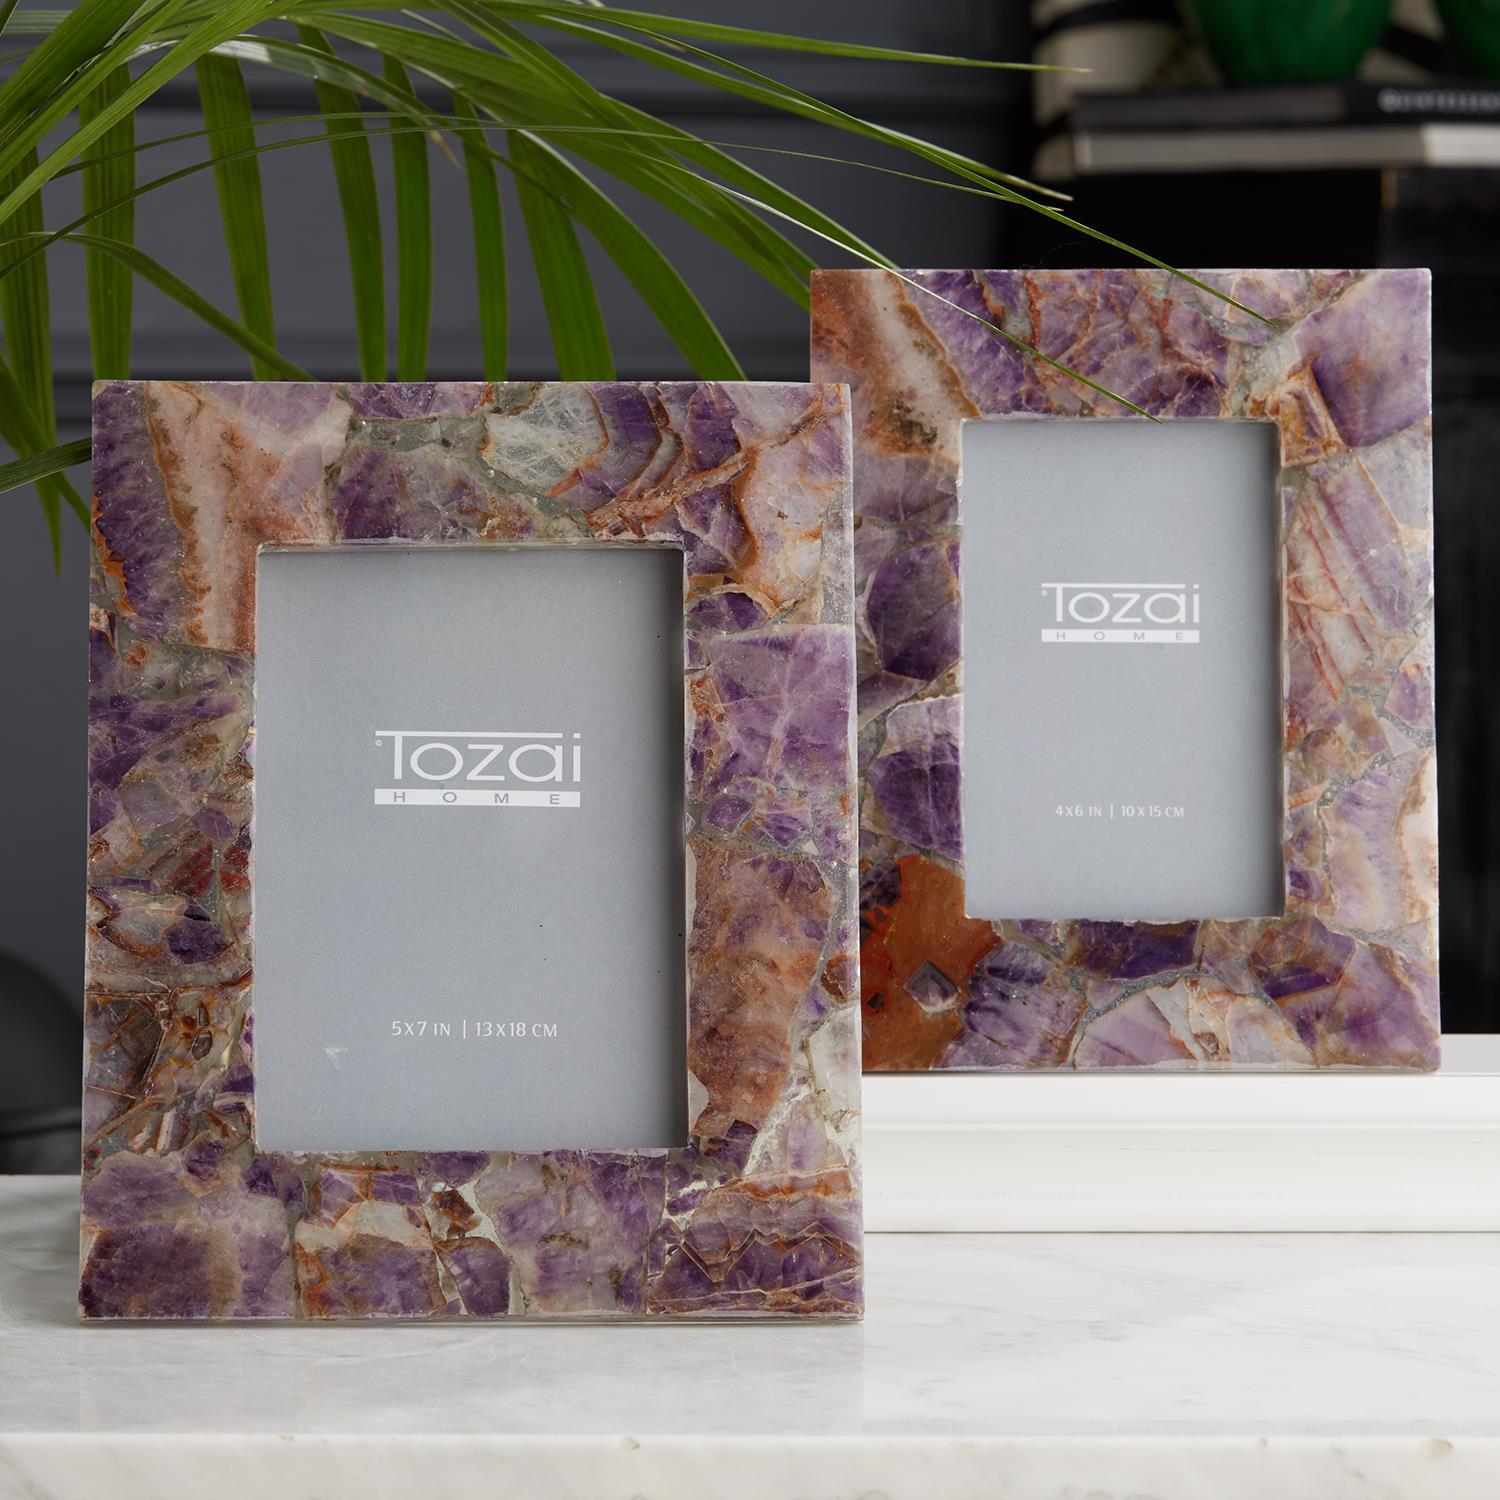 Two's Company Amethyst Photo Frames in Gift Box (includes 2 Sizes: 4 x 6 and 5 x 7)